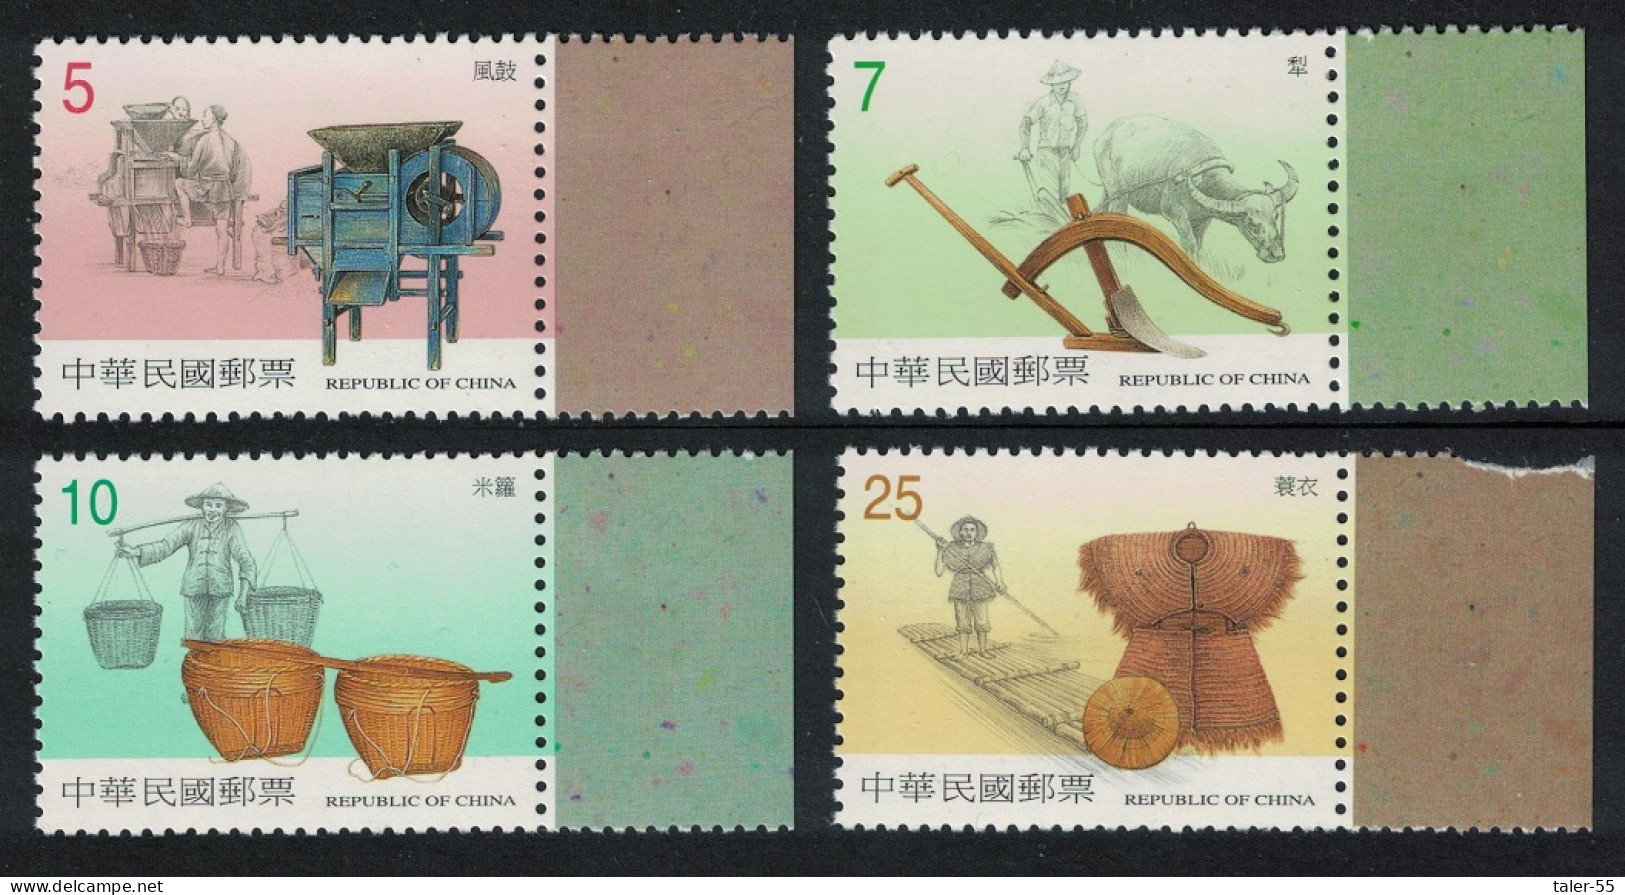 Taiwan Early Agricultural Implements 4v Margins 2001 MNH SG#2715-2718 - Unused Stamps